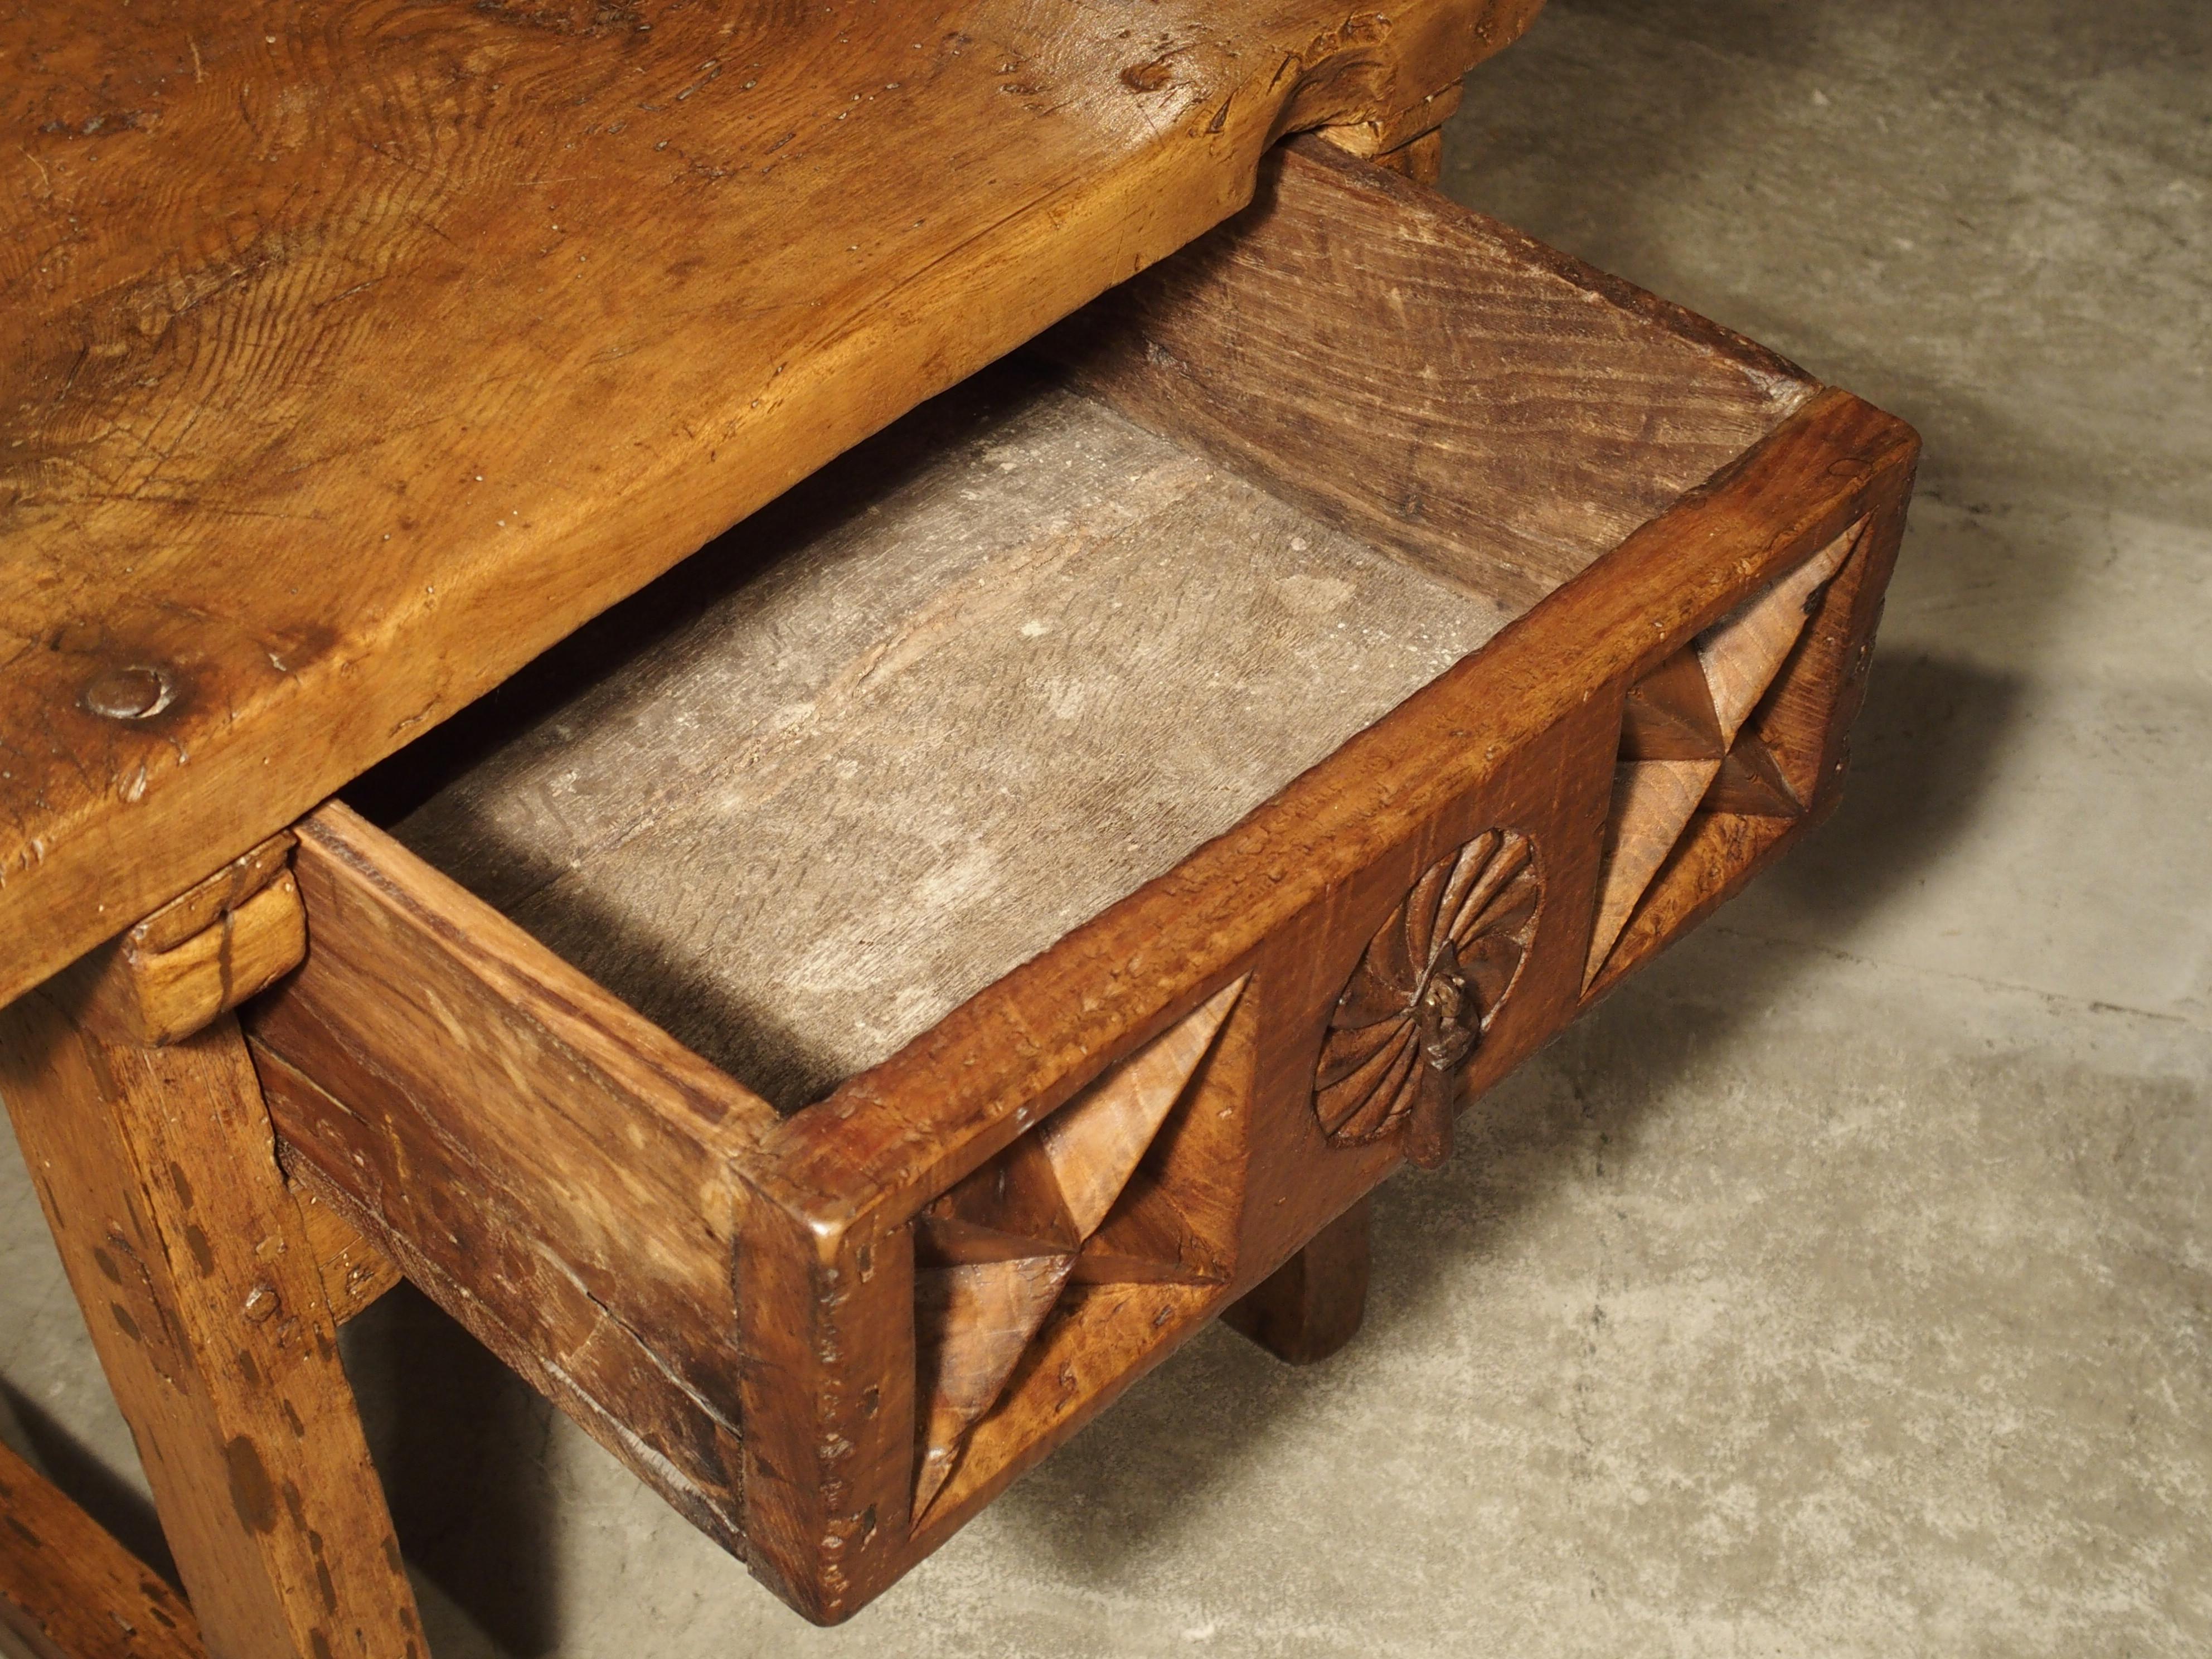 Hand-Carved Beautiful 17th Century Walnut Side Table from Spain